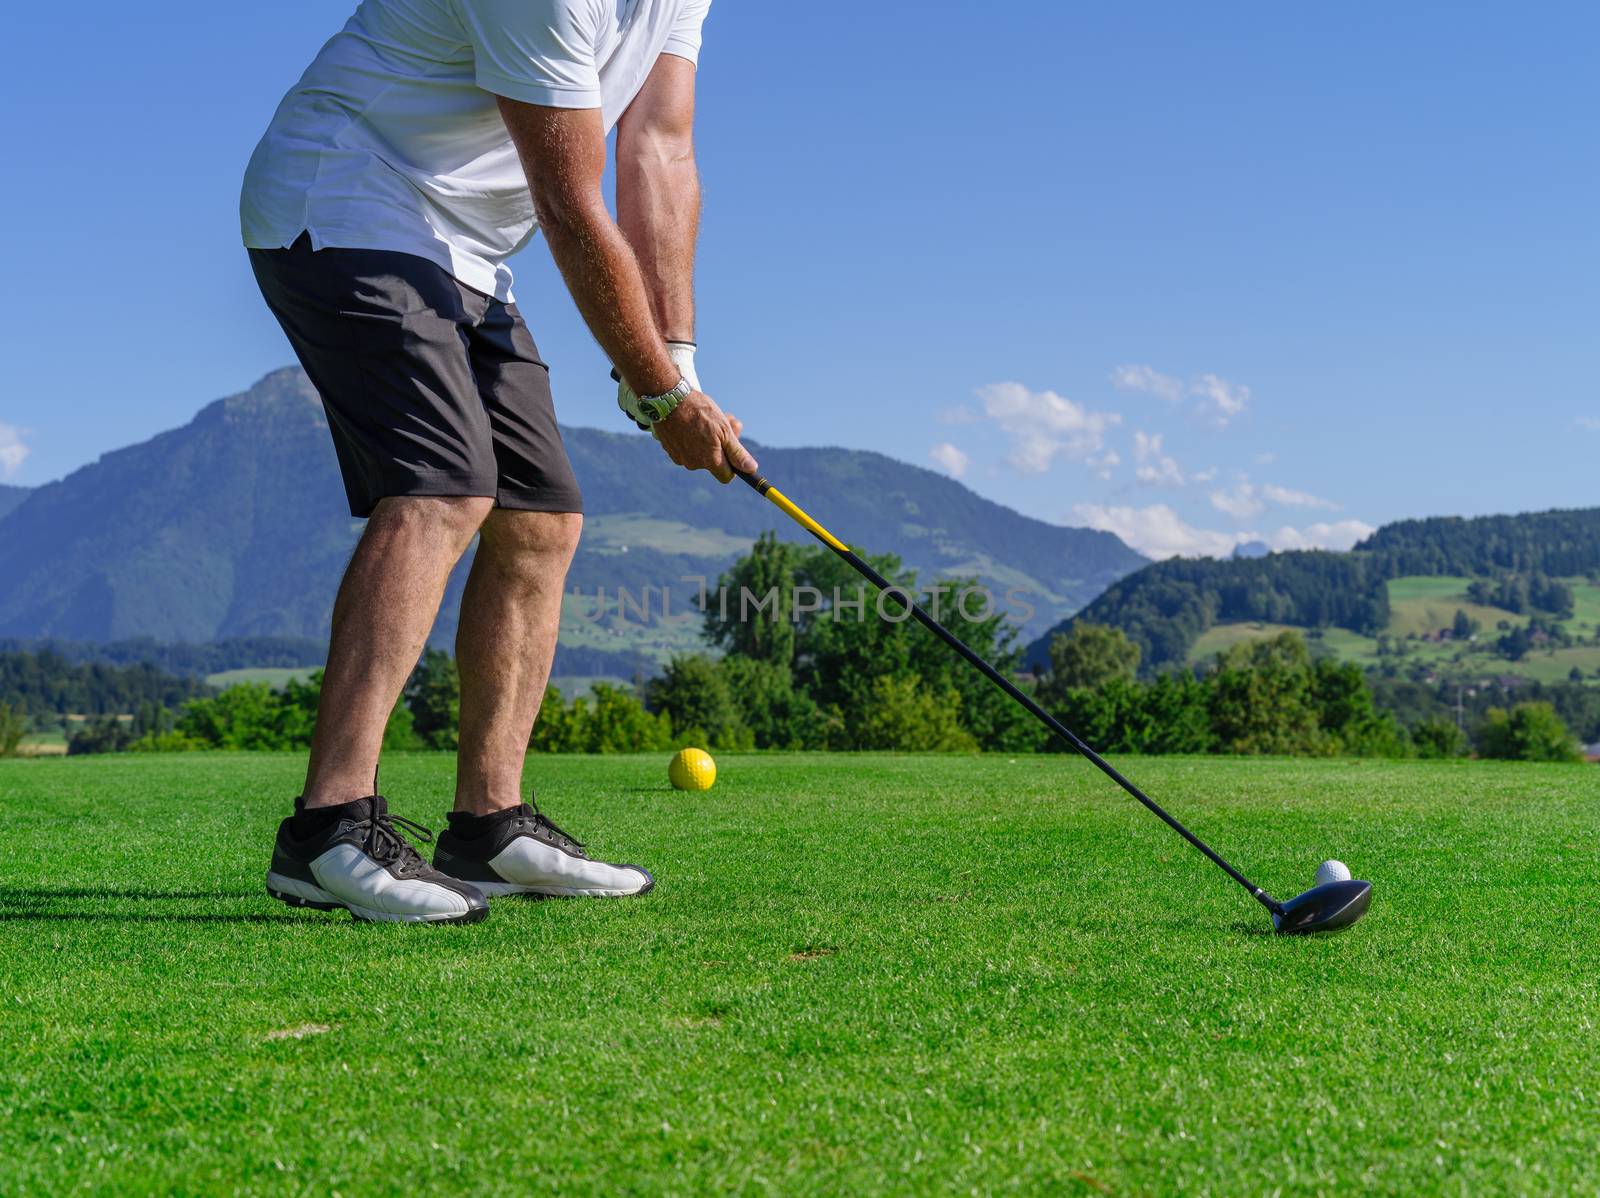 Photo of a male golfer about to tee off on the golf course.